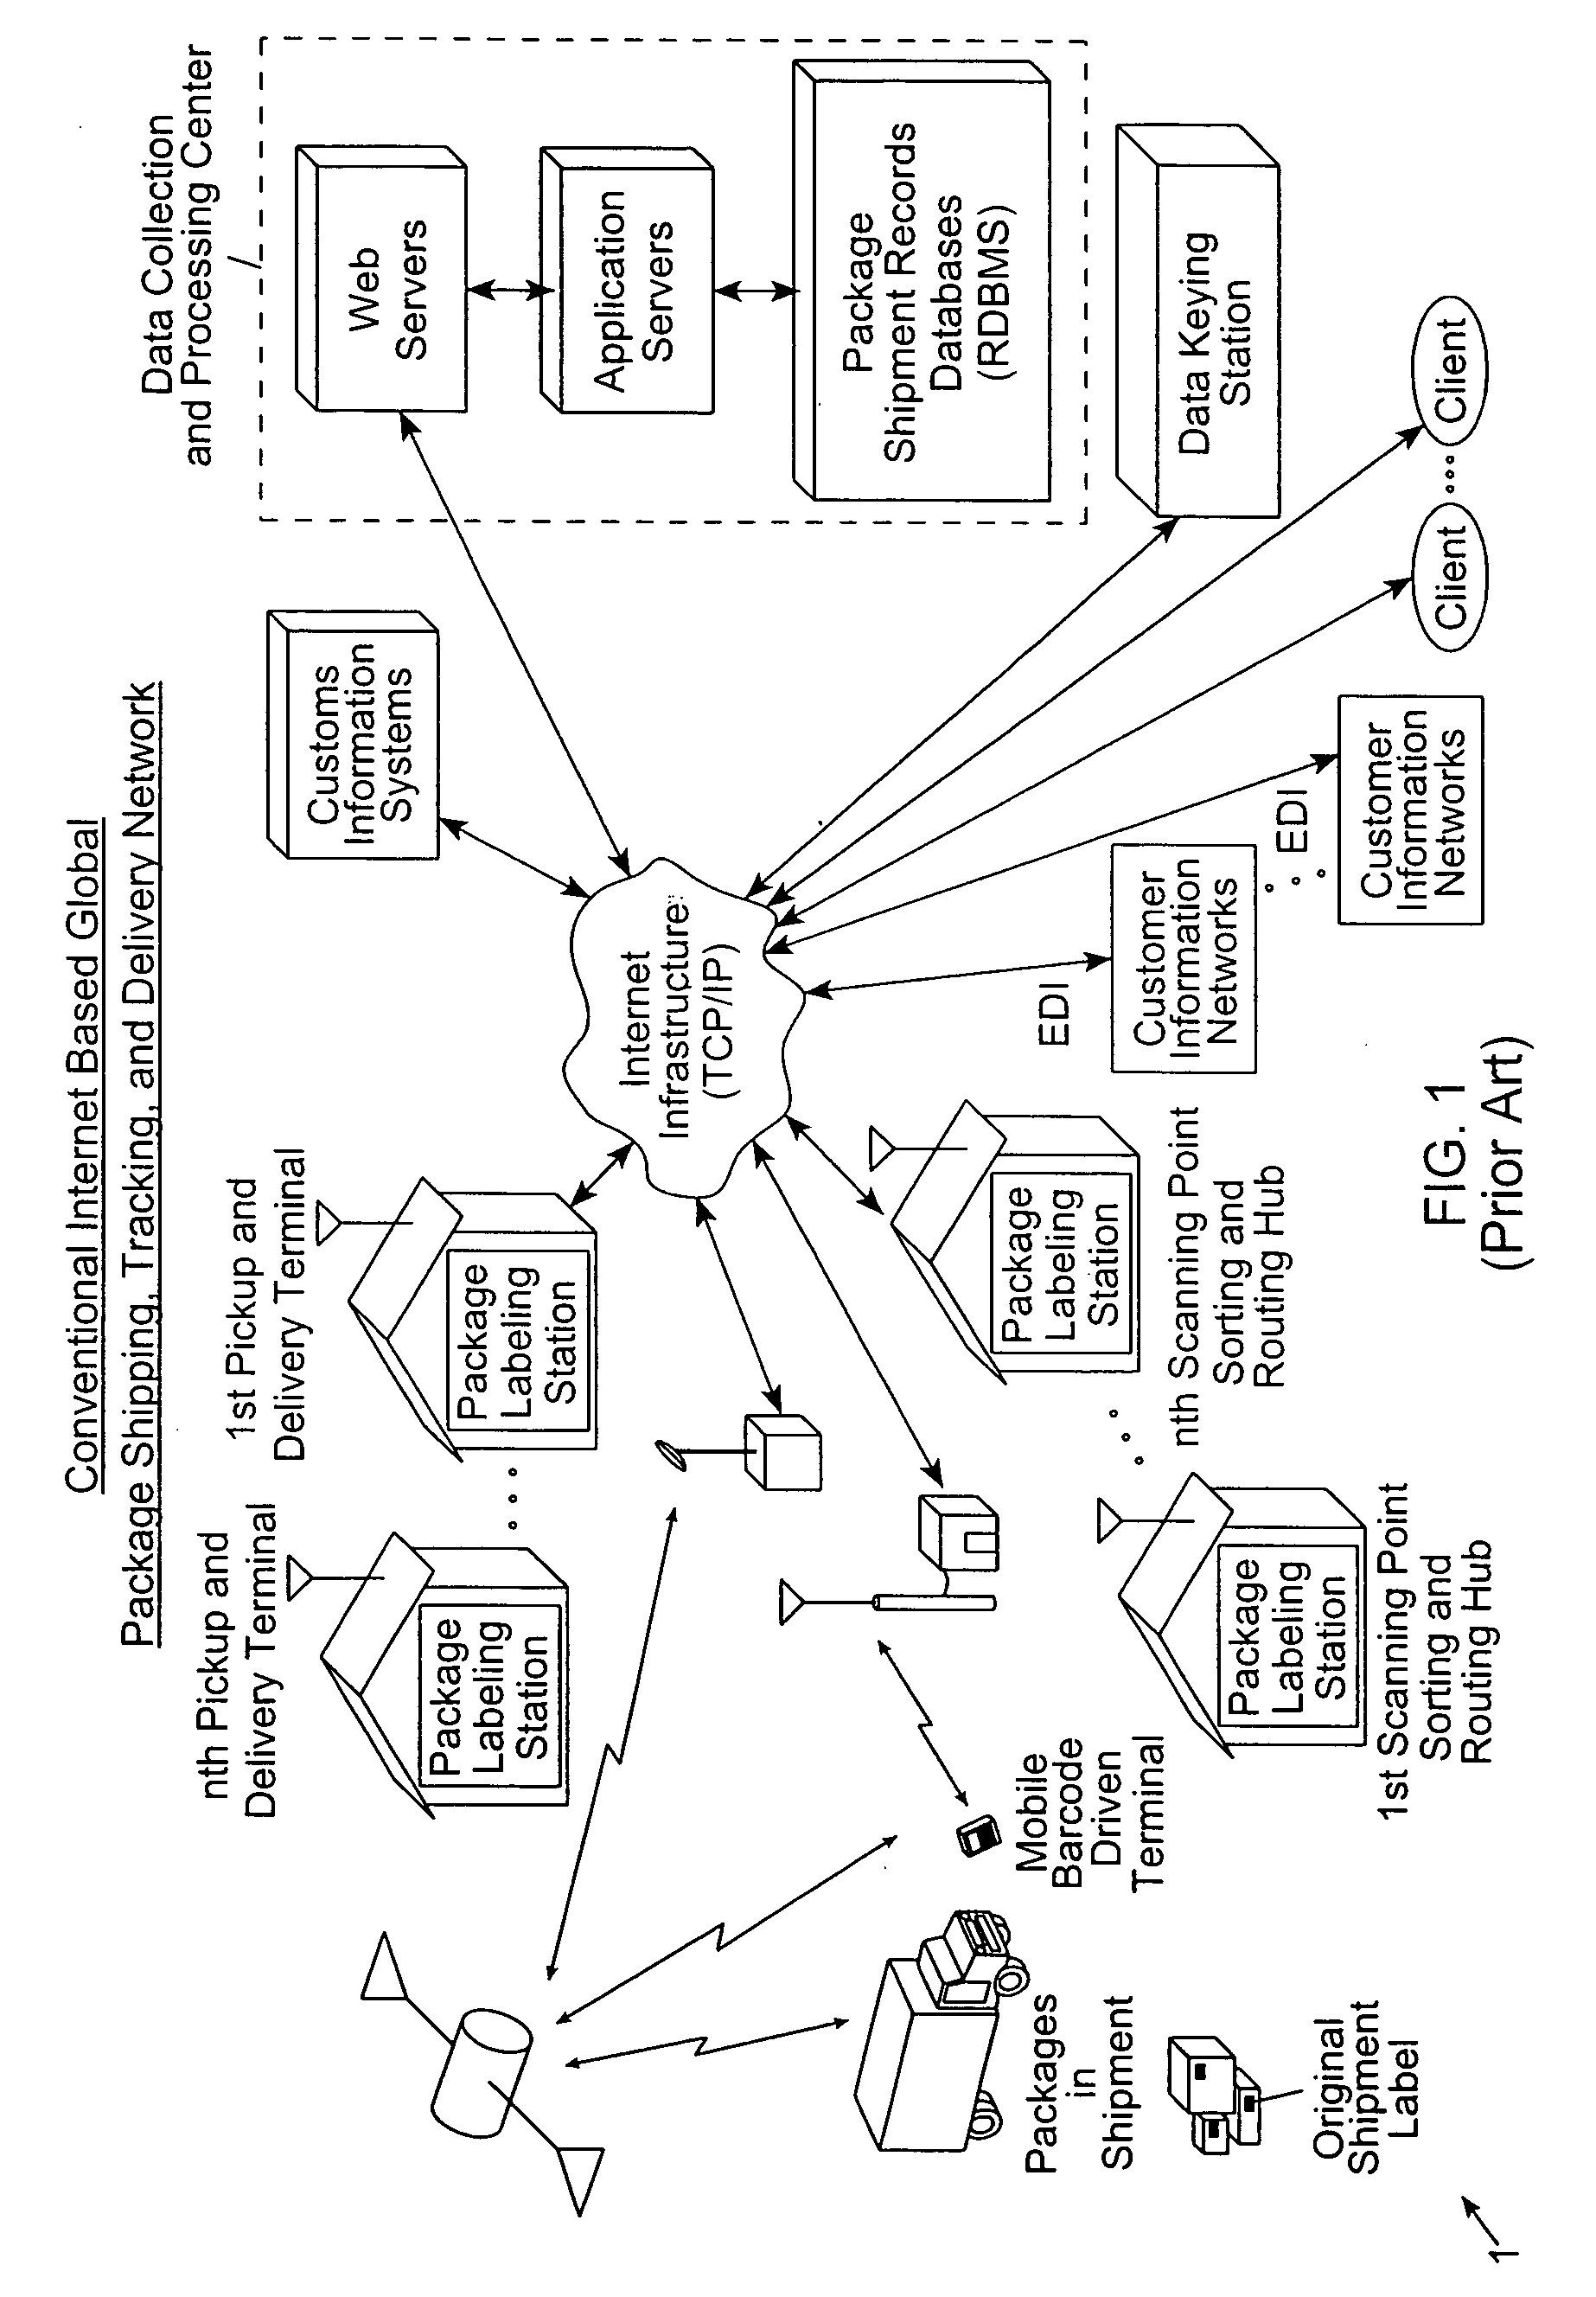 Digital color image capture and processing module